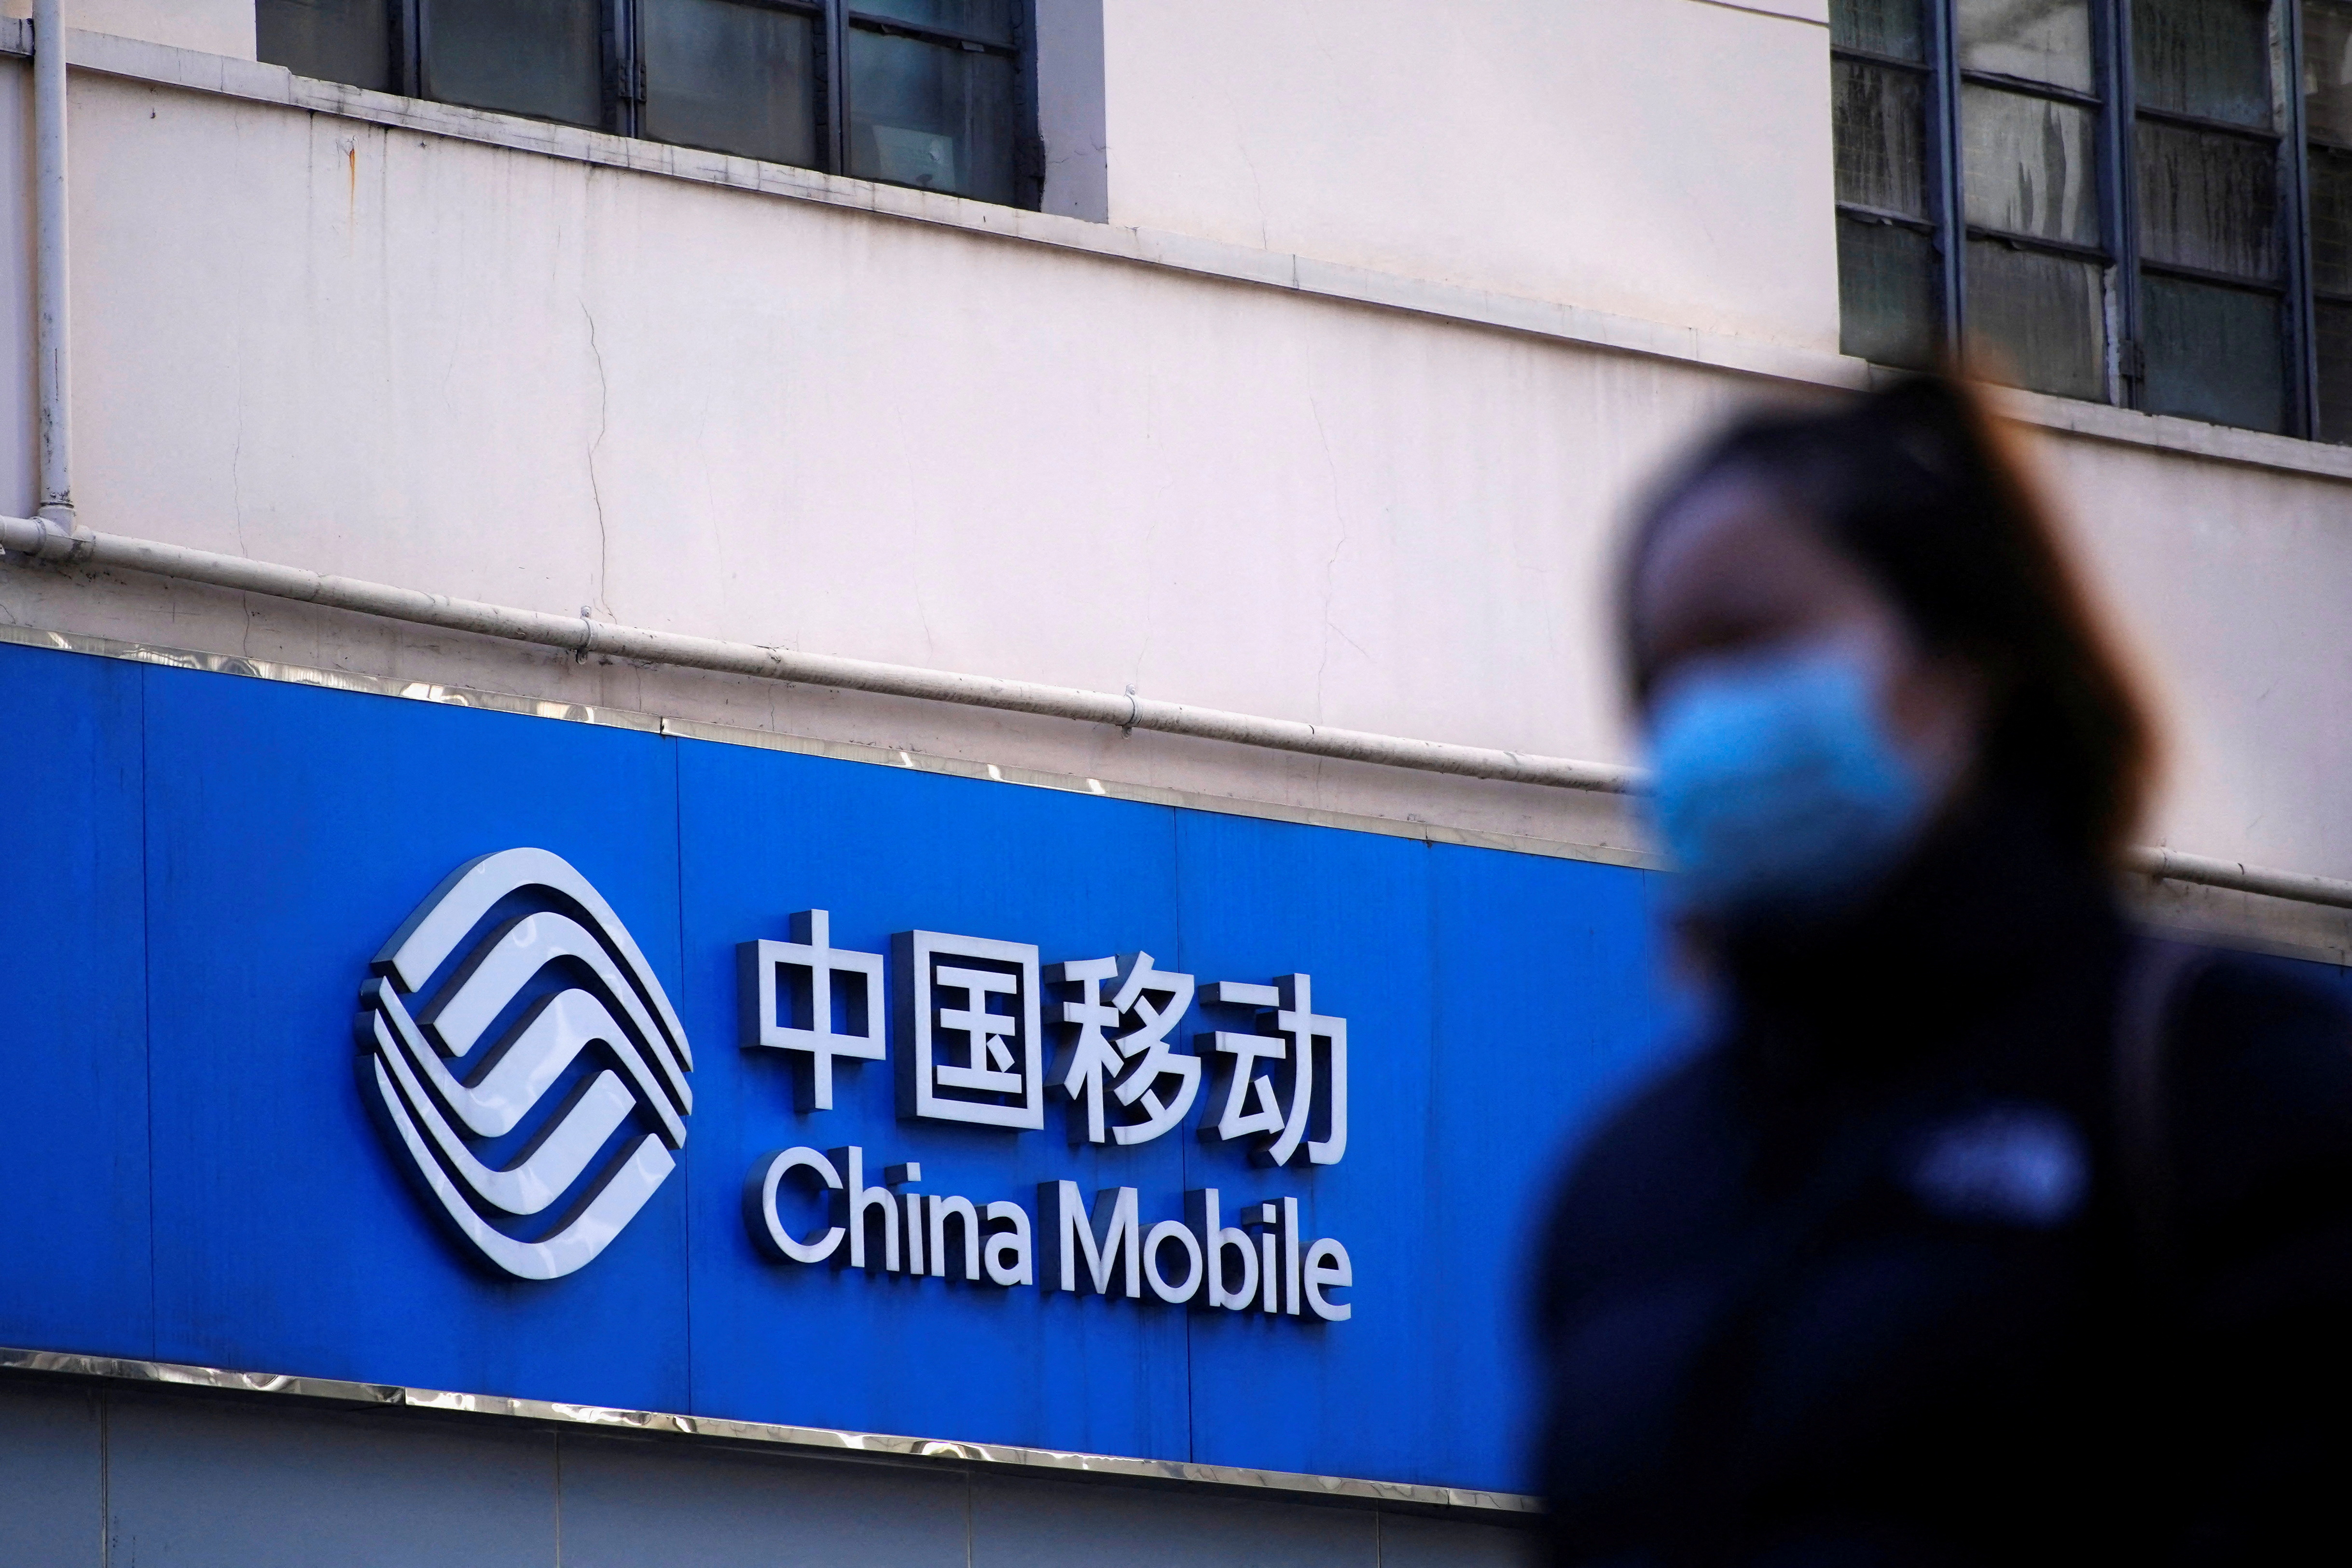 A sign of China Mobile is seen on a street, during the coronavirus disease (COVID-19) outbreak in Shanghai